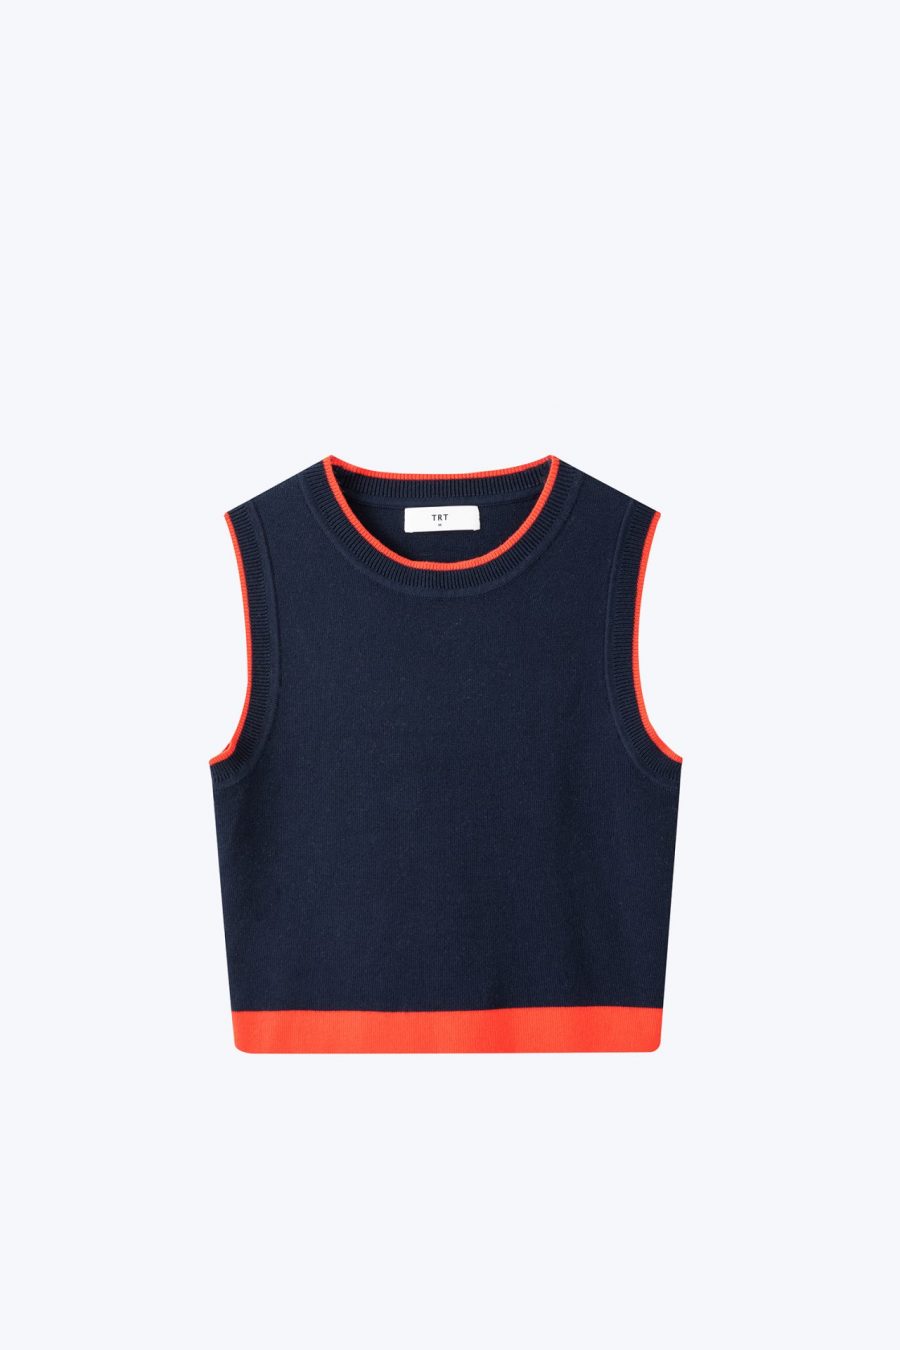 CKV000753S Knitted Colourblock Cropped Top NAVY